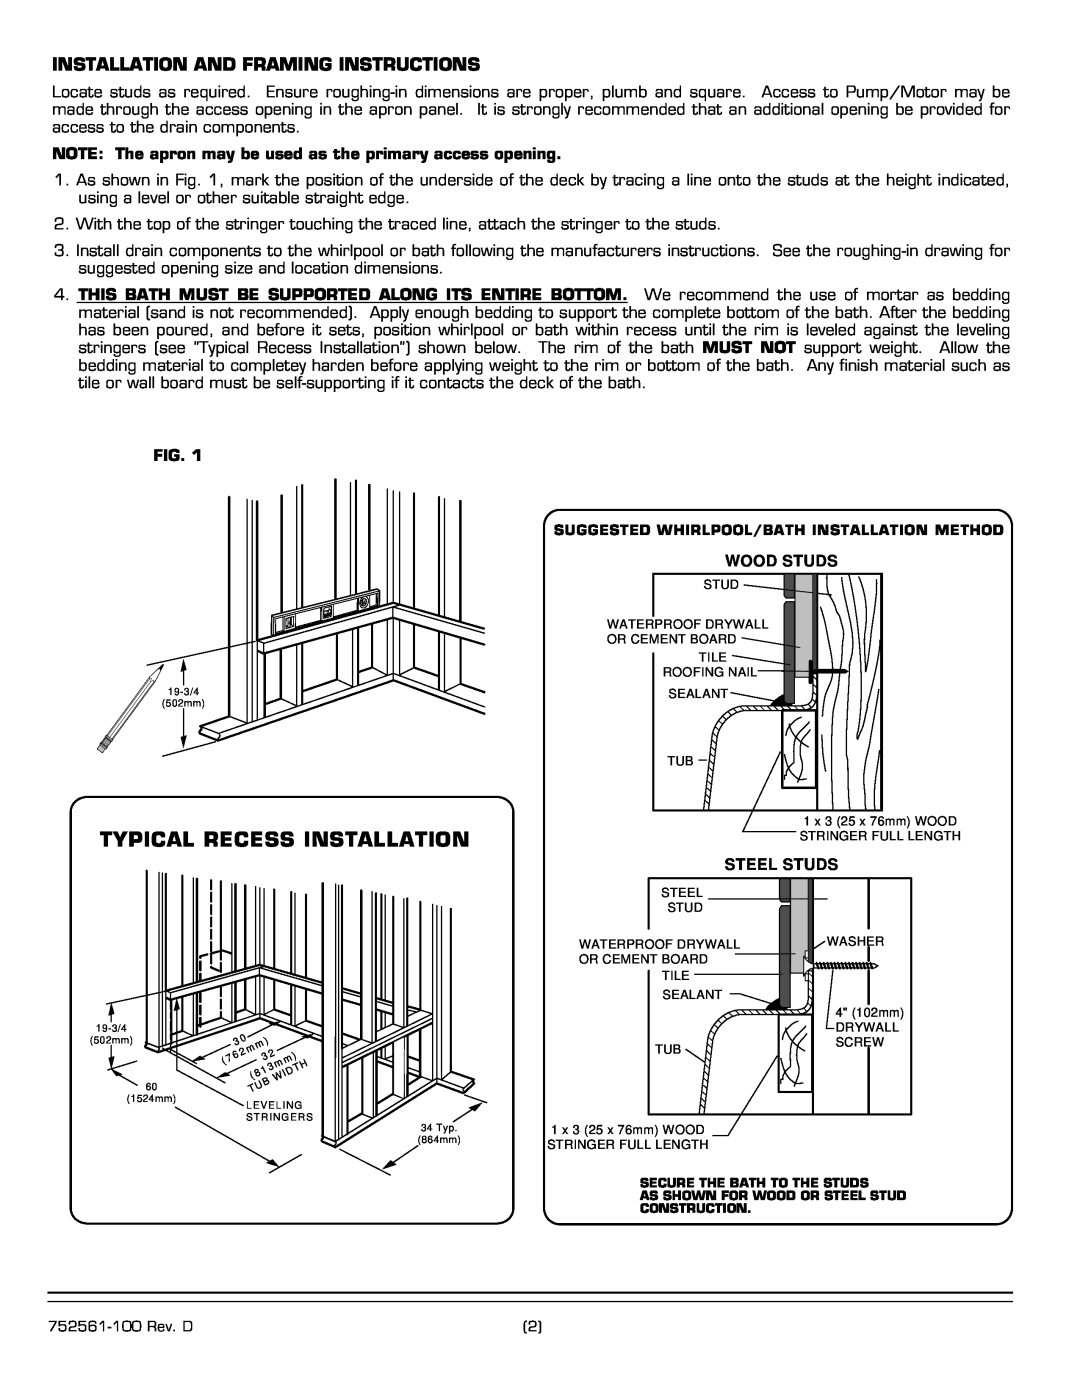 American Standard 2776.XXXW Series Typical Recess Installation, Installation And Framing Instructions, Wood Studs 